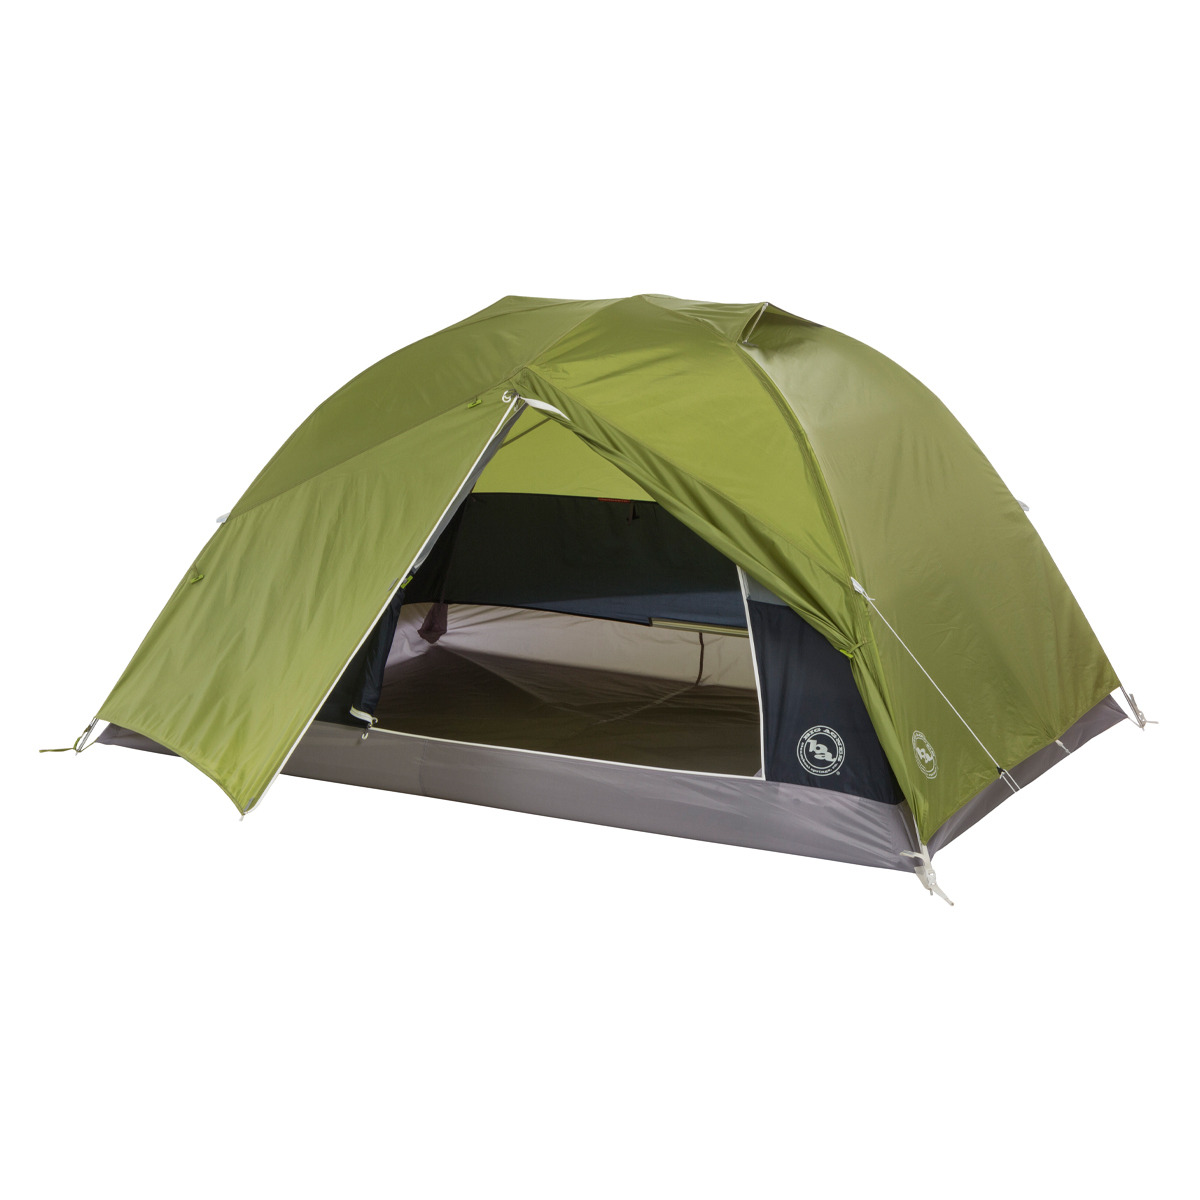 Blacktail 2 - 2-Person Camping Tent